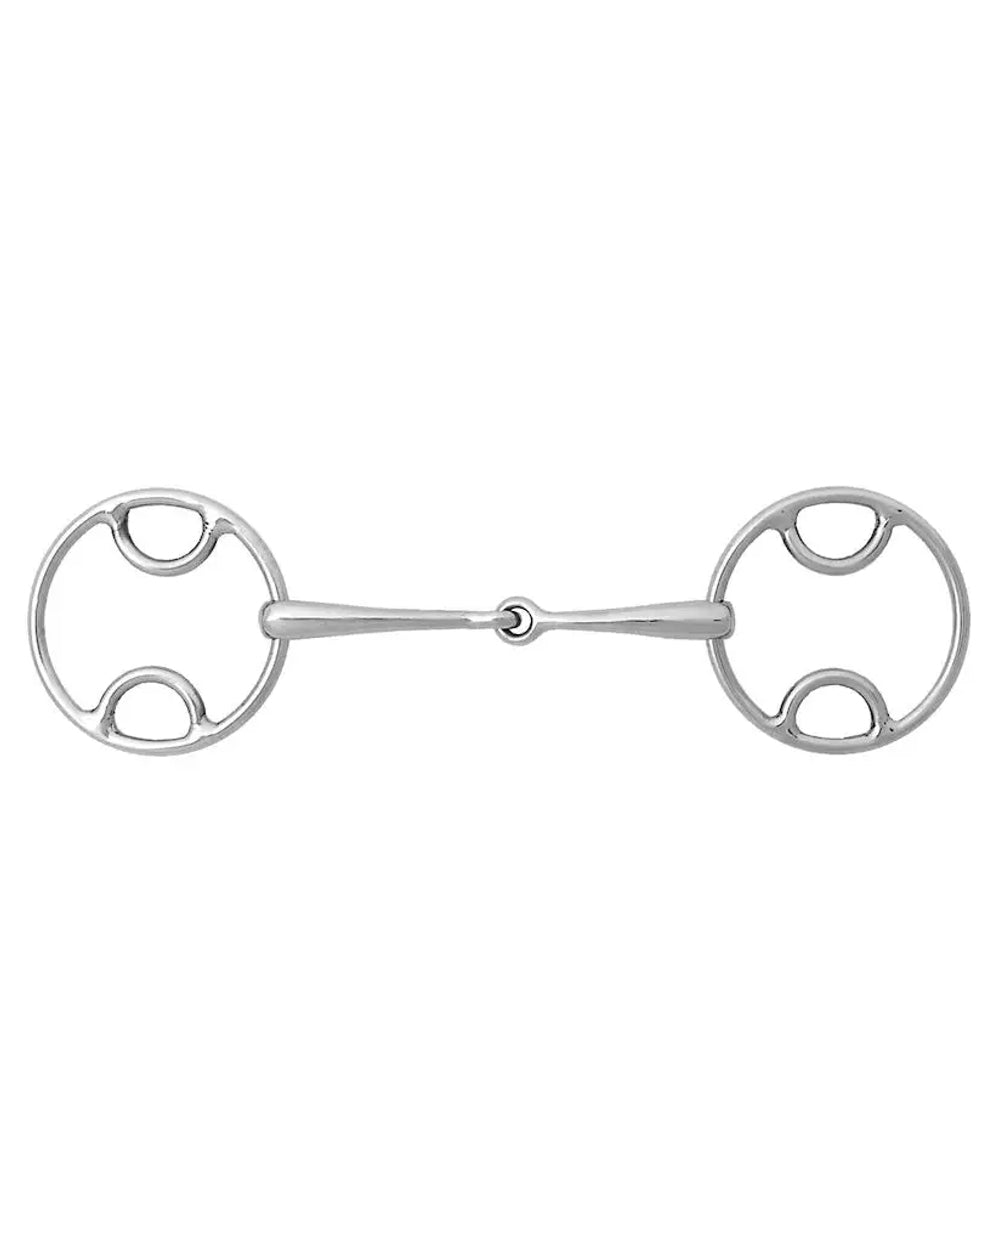 Korsteel Stainless Steel Jointed Beval Loose Ring Snaffle Bit on white background 